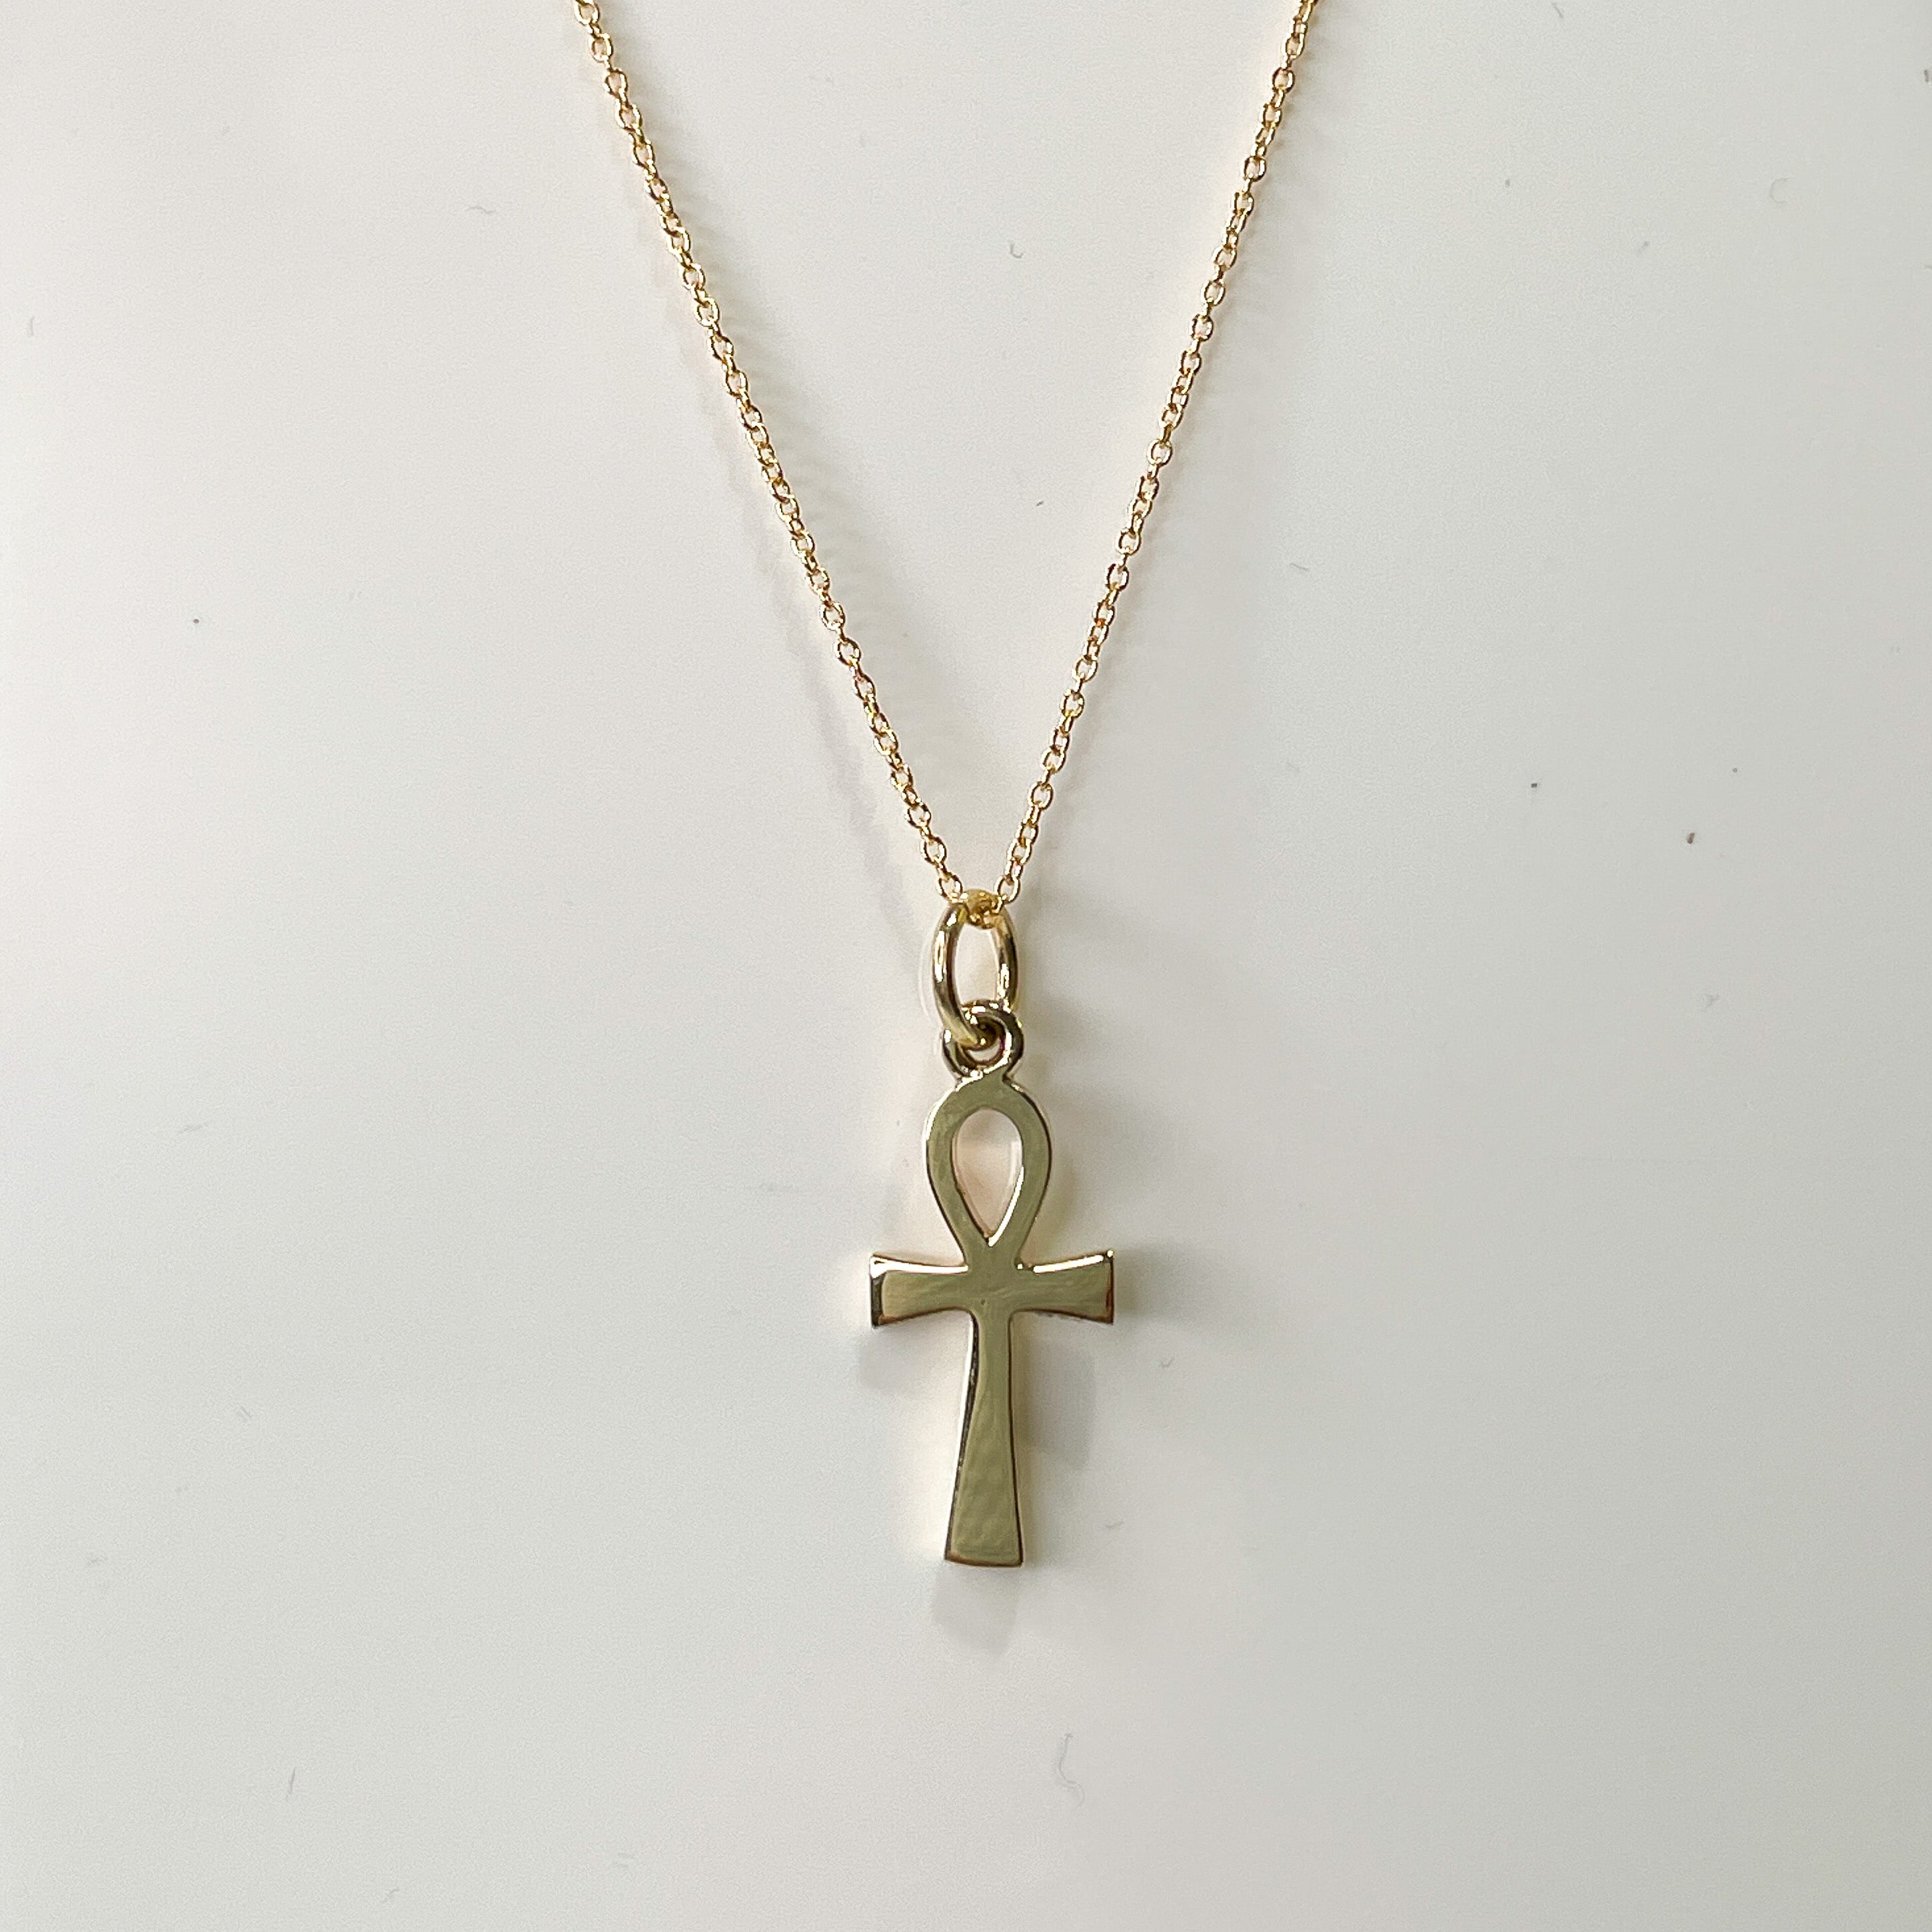 Amazon.com: 18K Gold Plated Original Key To Life Ankh Cross Pendant Necklace  unisex /80% Pure Copper Extracted from  Sinai/HandMade/Rustproof/Adjustable/Symbol of Protection/Egyptian Jewelry  Gift for Women/Men. : Handmade Products